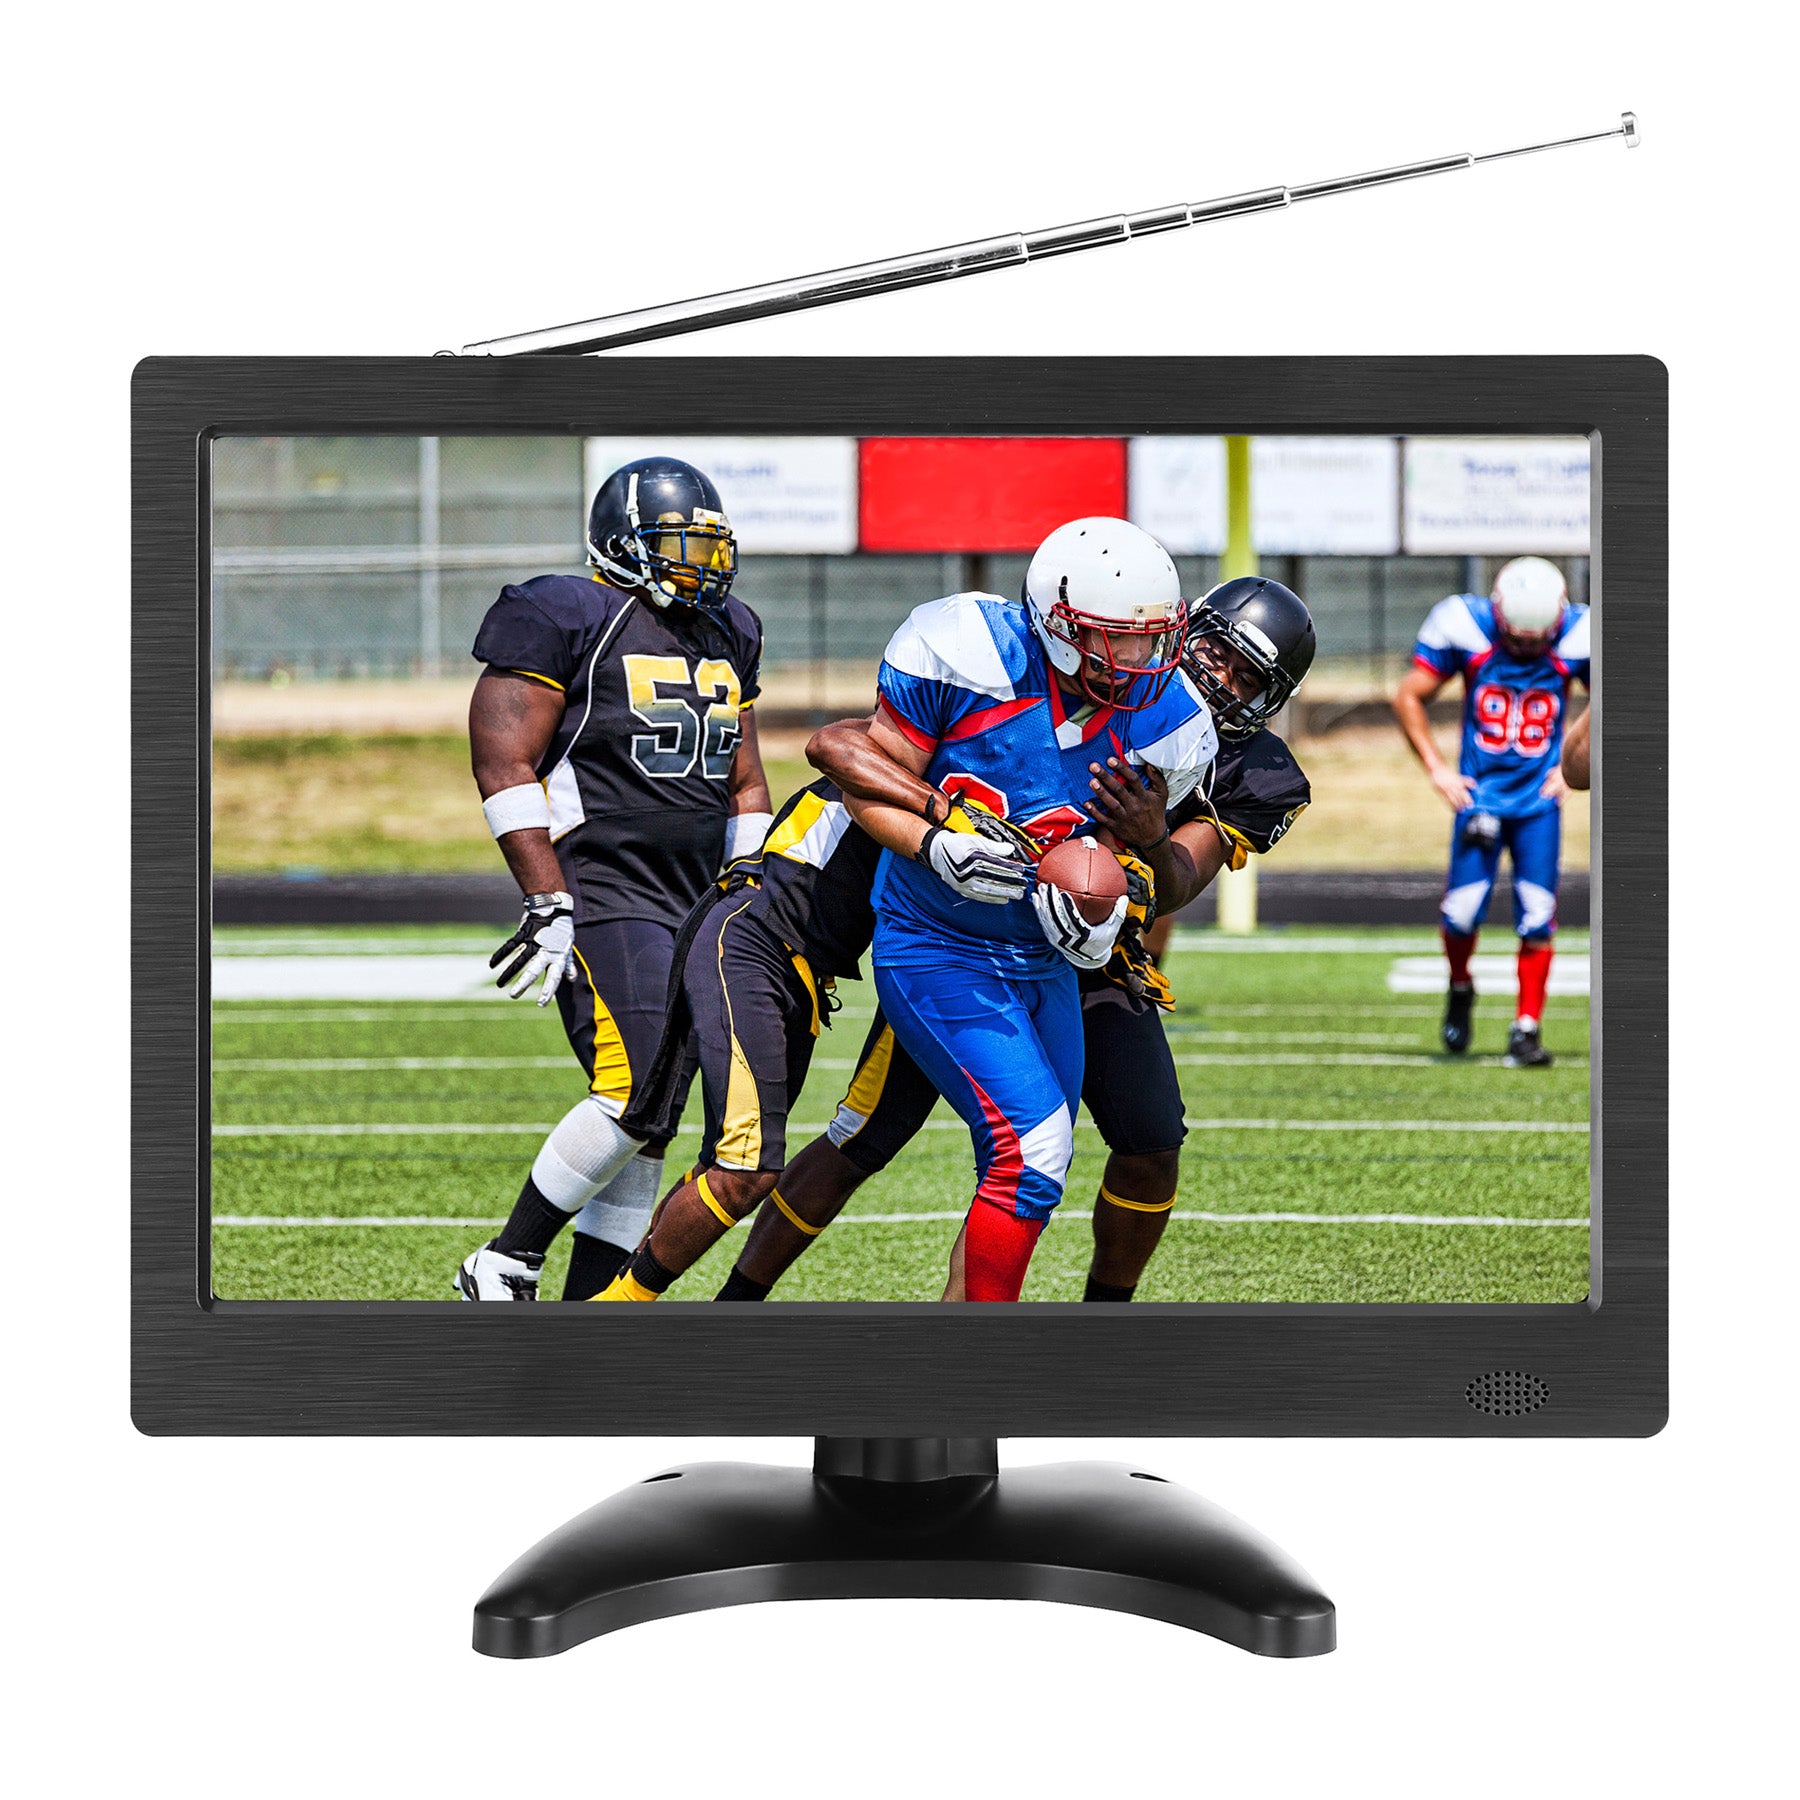 24 Supersonic 12 Volt AC/DC LED HDTV with DVD Player, USB, SD Card Reader,  HDMI